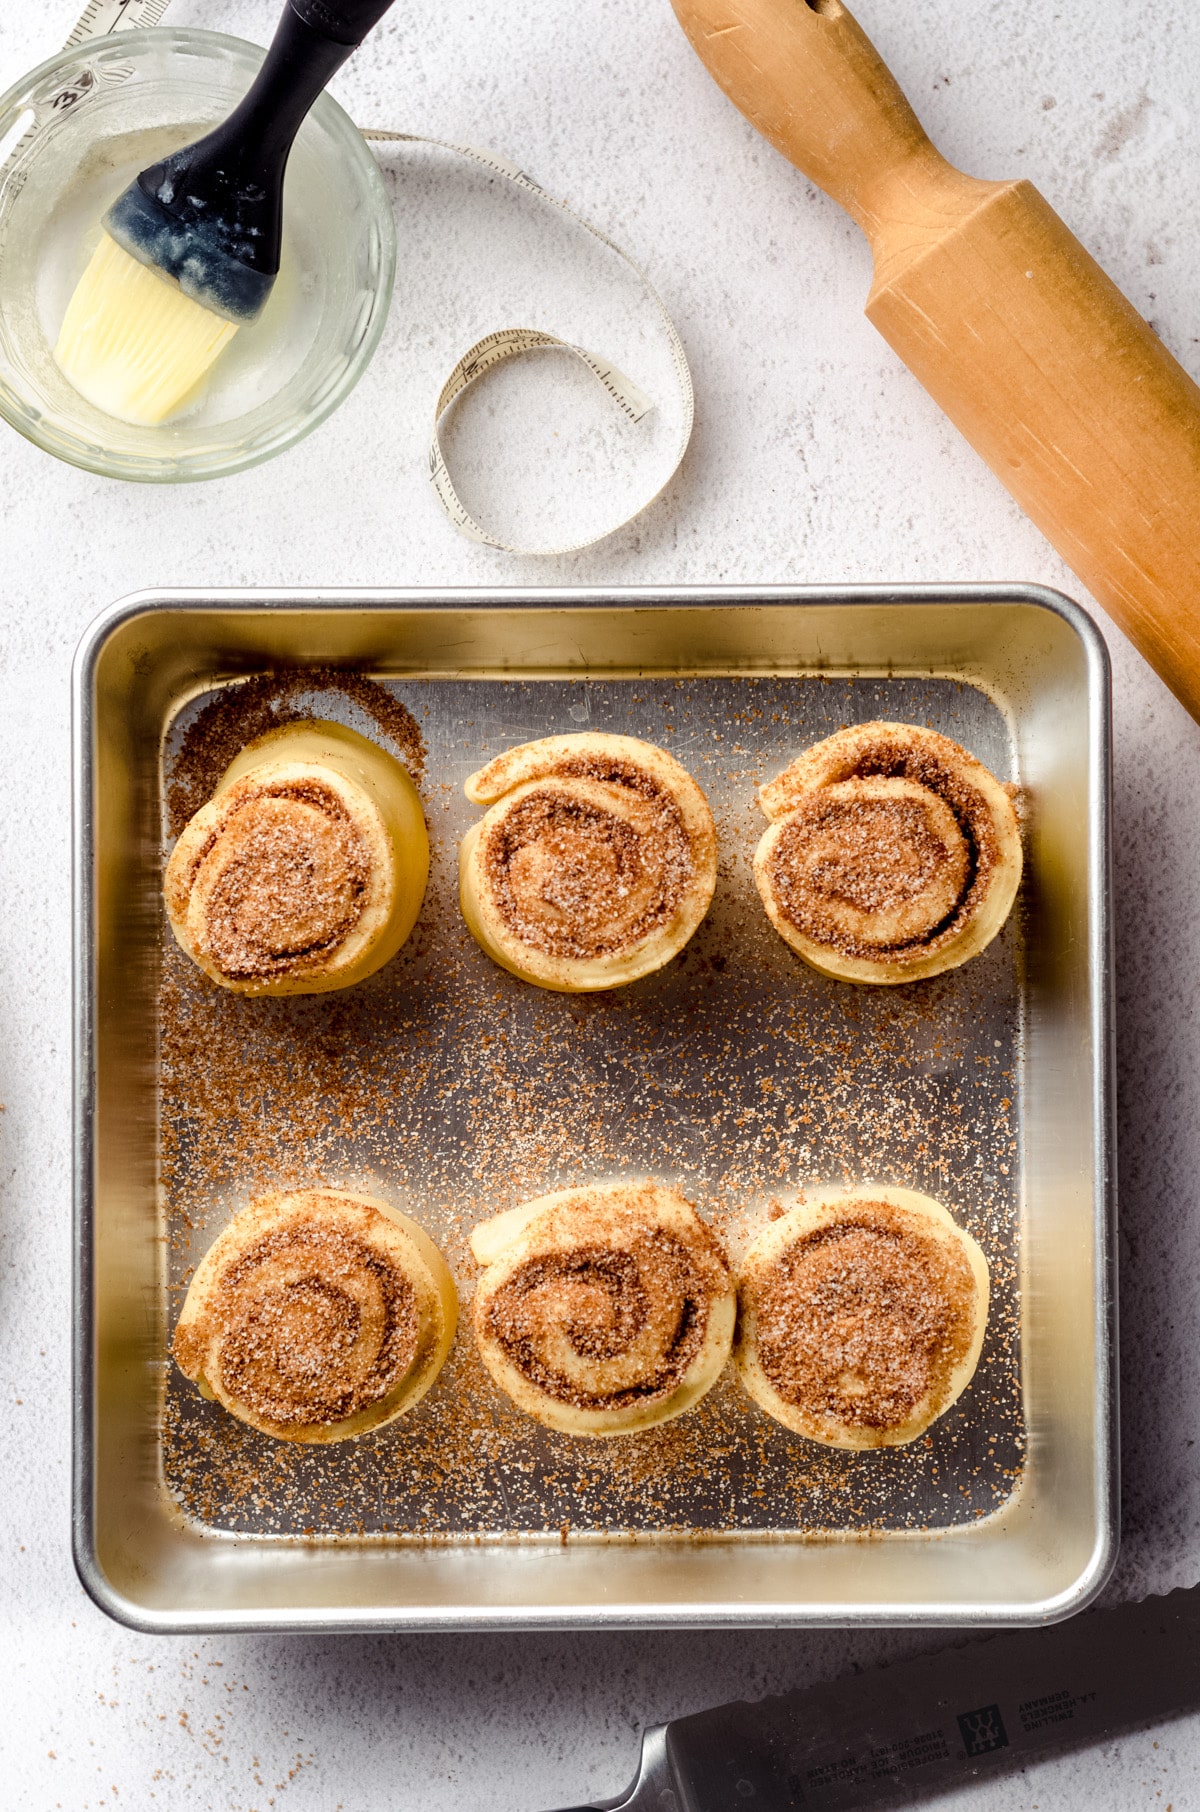 Small batch cinnamon rolls in a baking dish ready to rise.